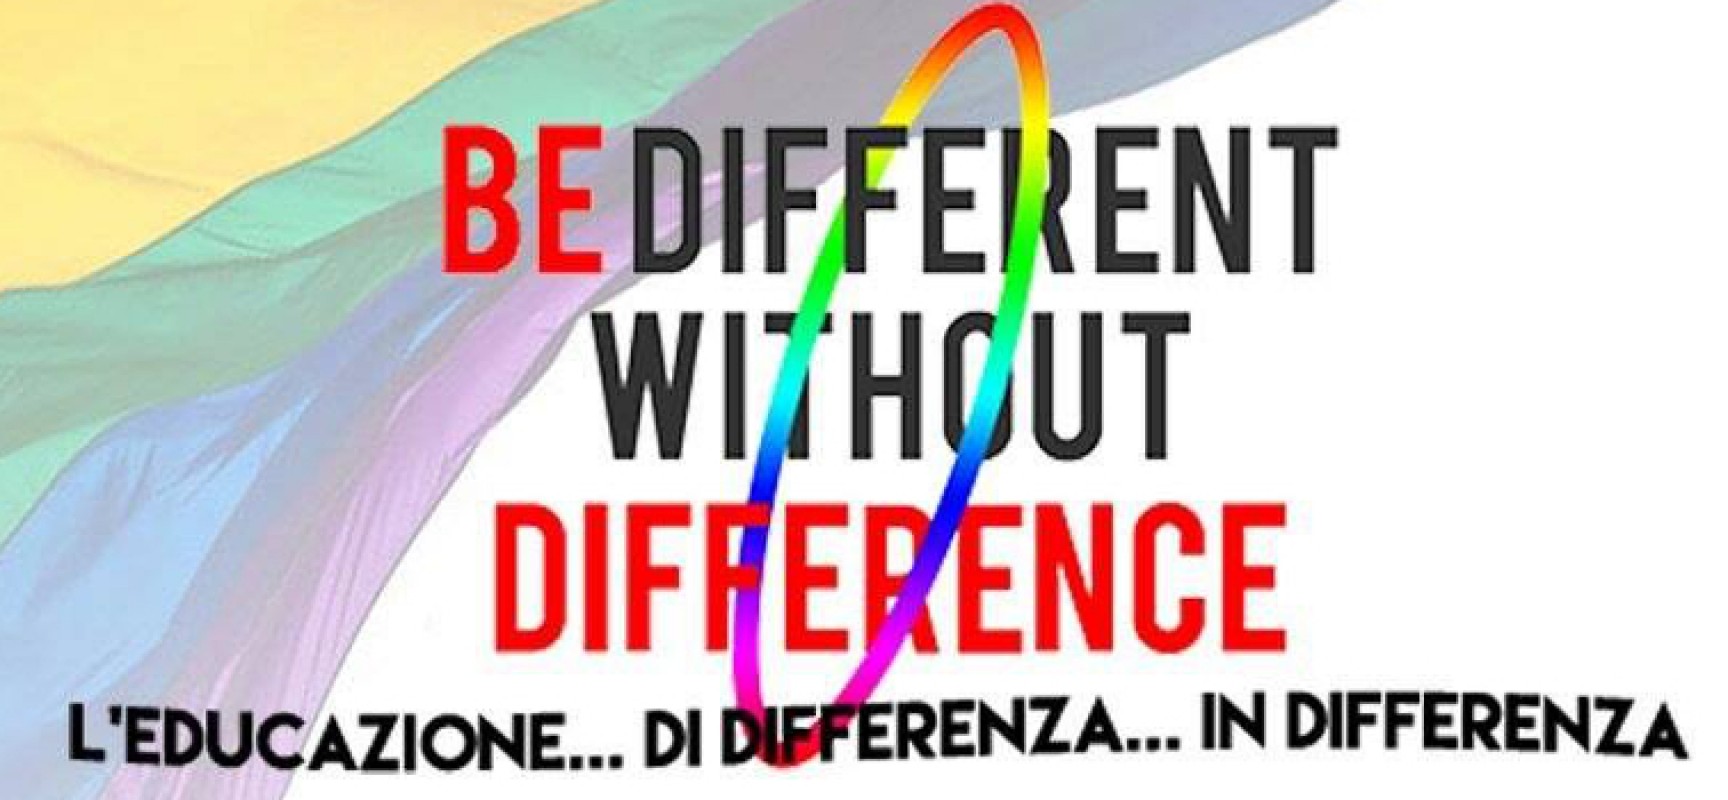 Arcigay Bat presenta “Be different without difference”, il sottile limite tra differenza e indifferenza